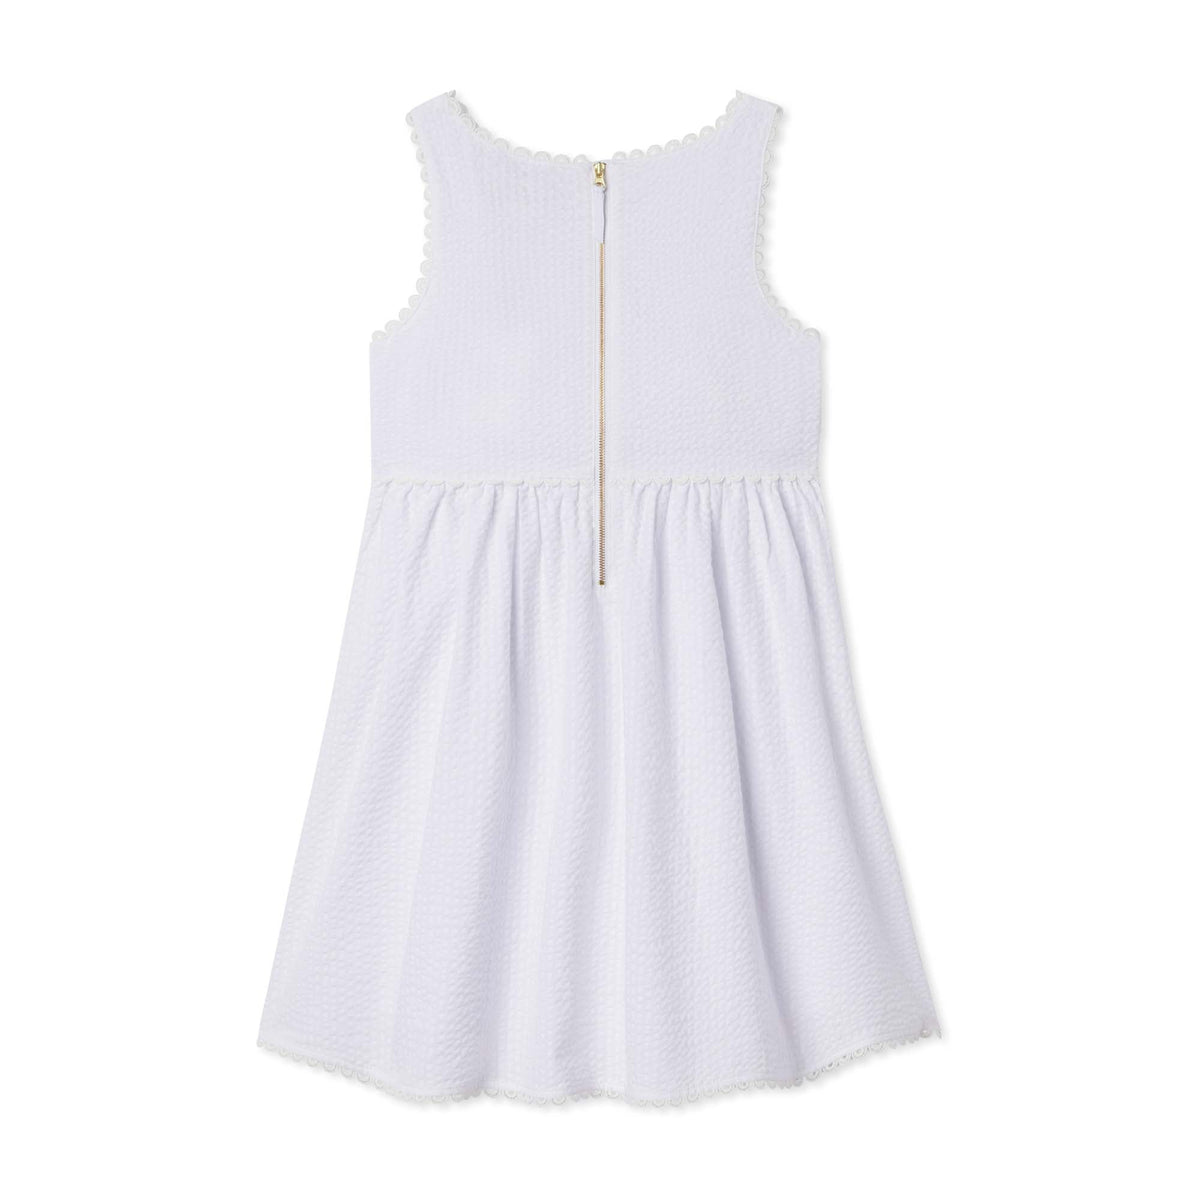 Classic and Preppy Charlotte Dress, White Seersucker-Dresses, Jumpsuits and Rompers-CPC - Classic Prep Childrenswear